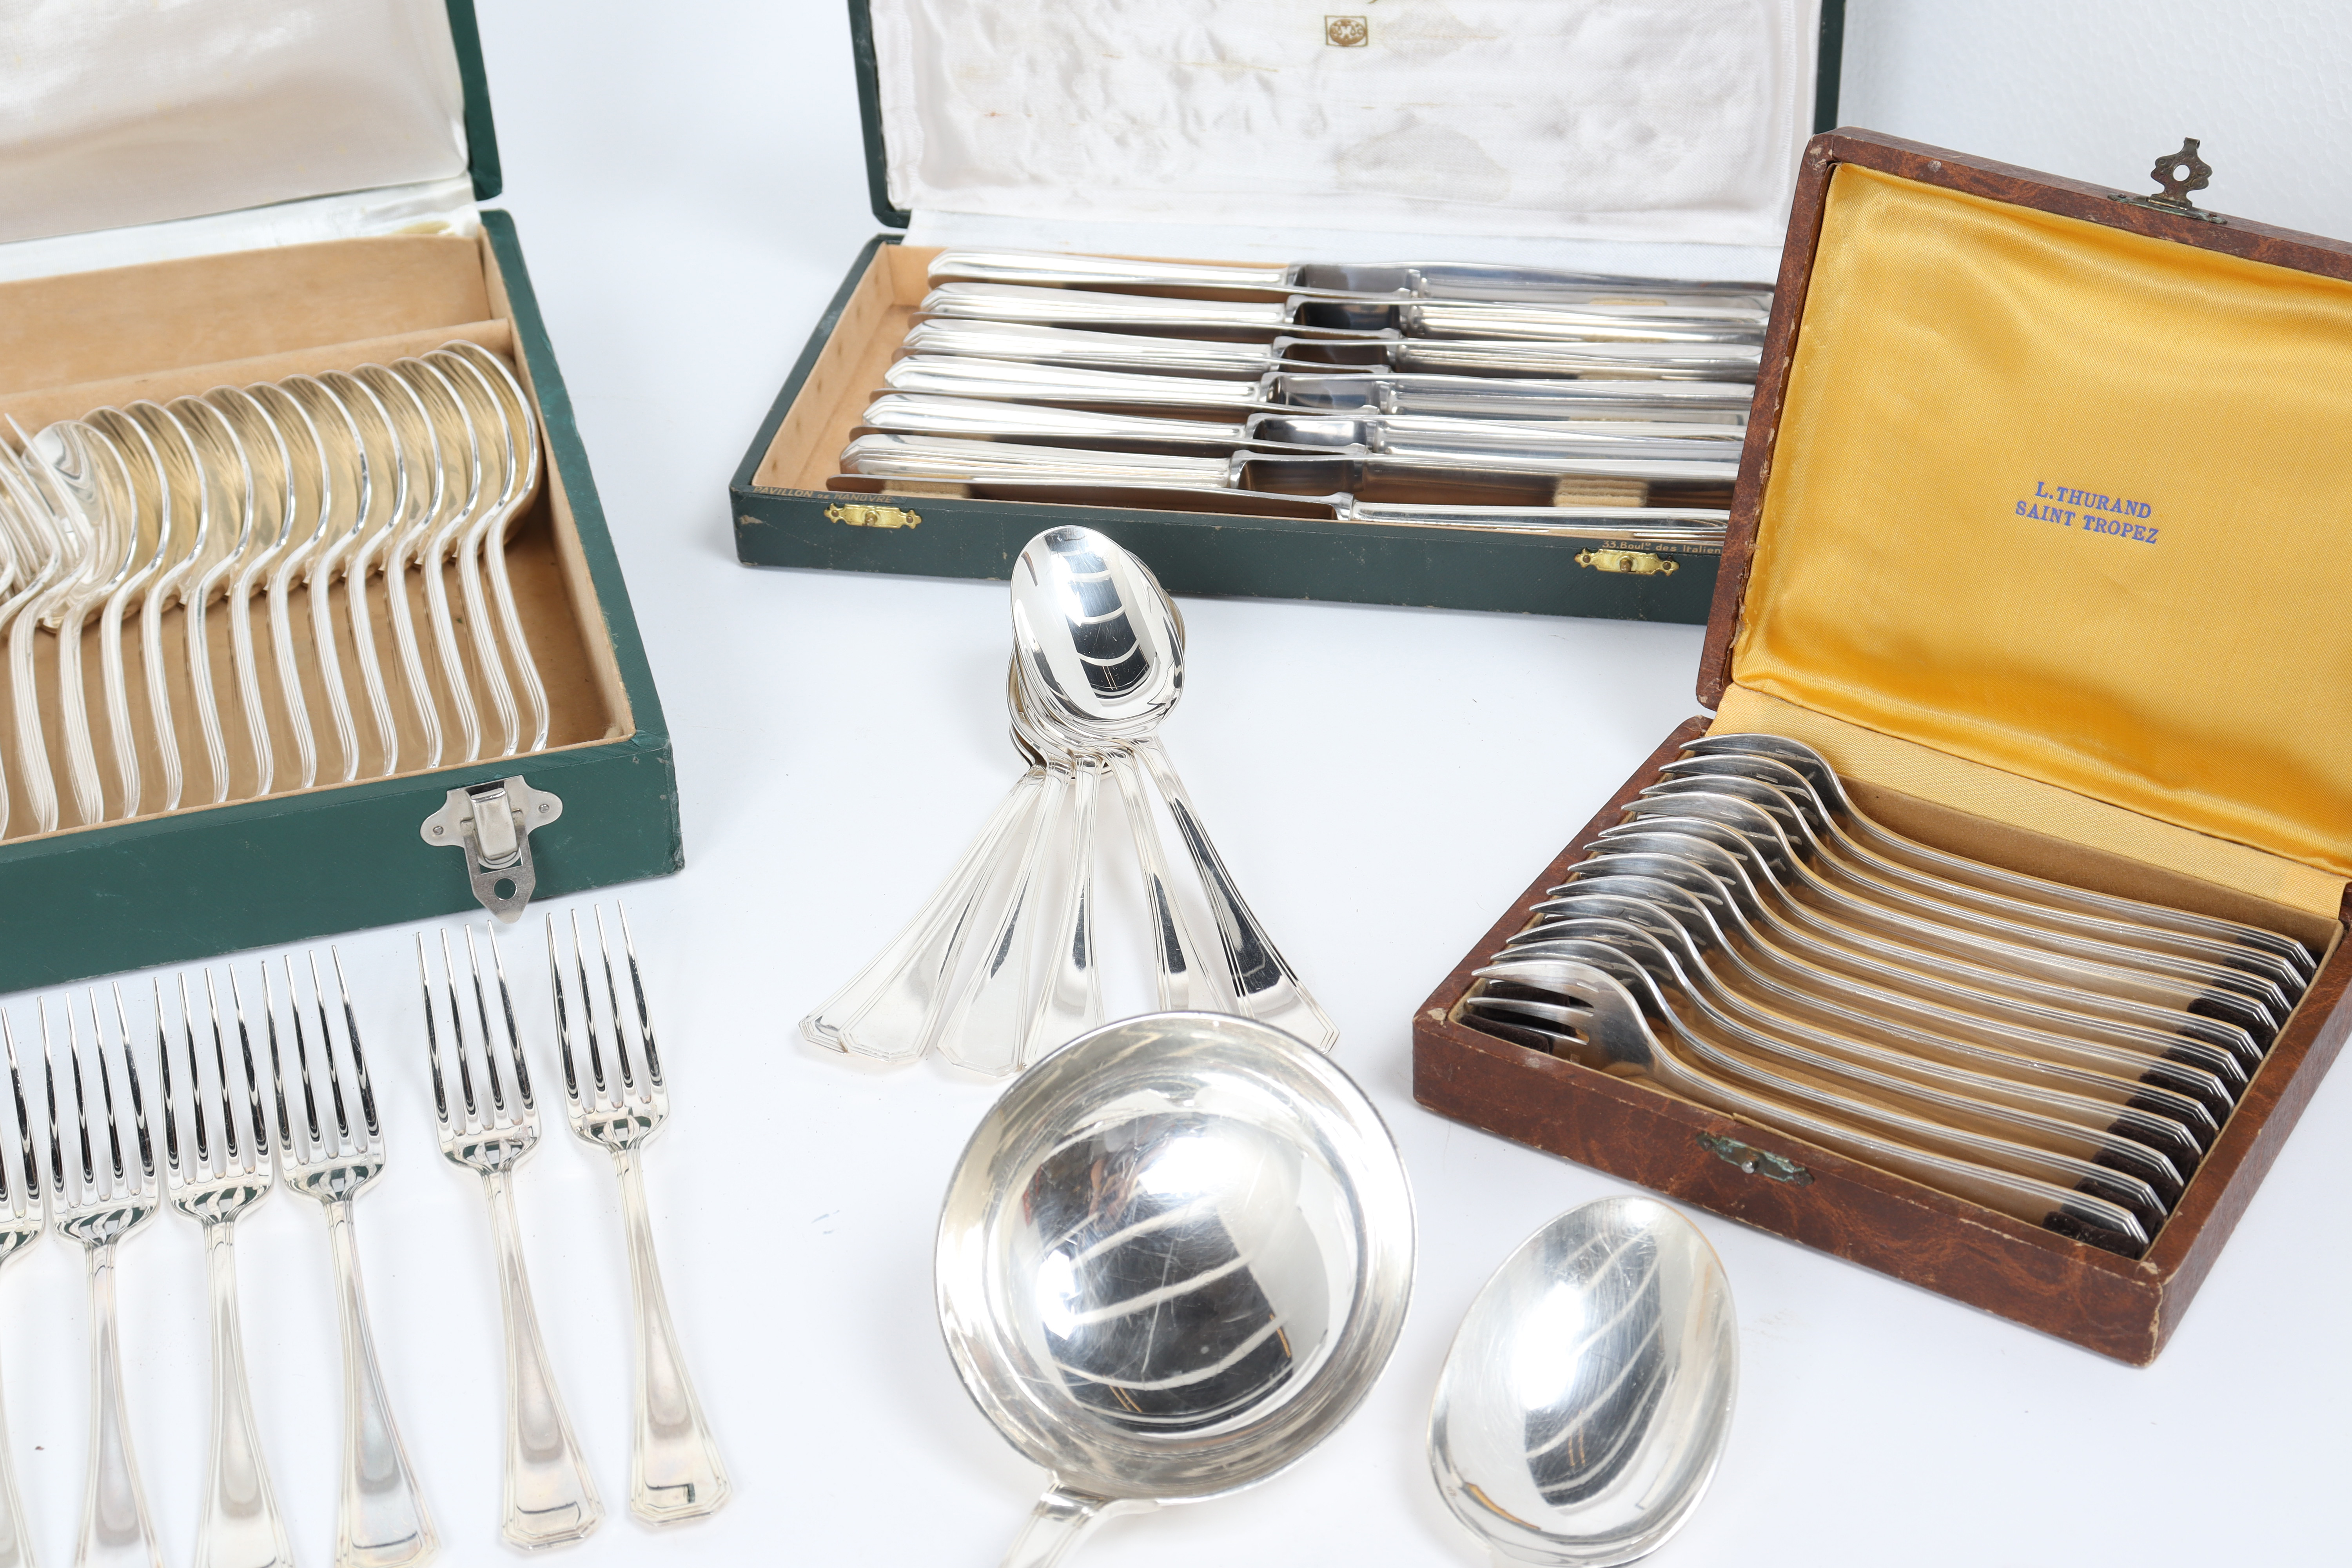 AN EXTENSIVE SERVICE OF CHRISTOFLE SILVER PLATED CUTLERY - Image 4 of 4